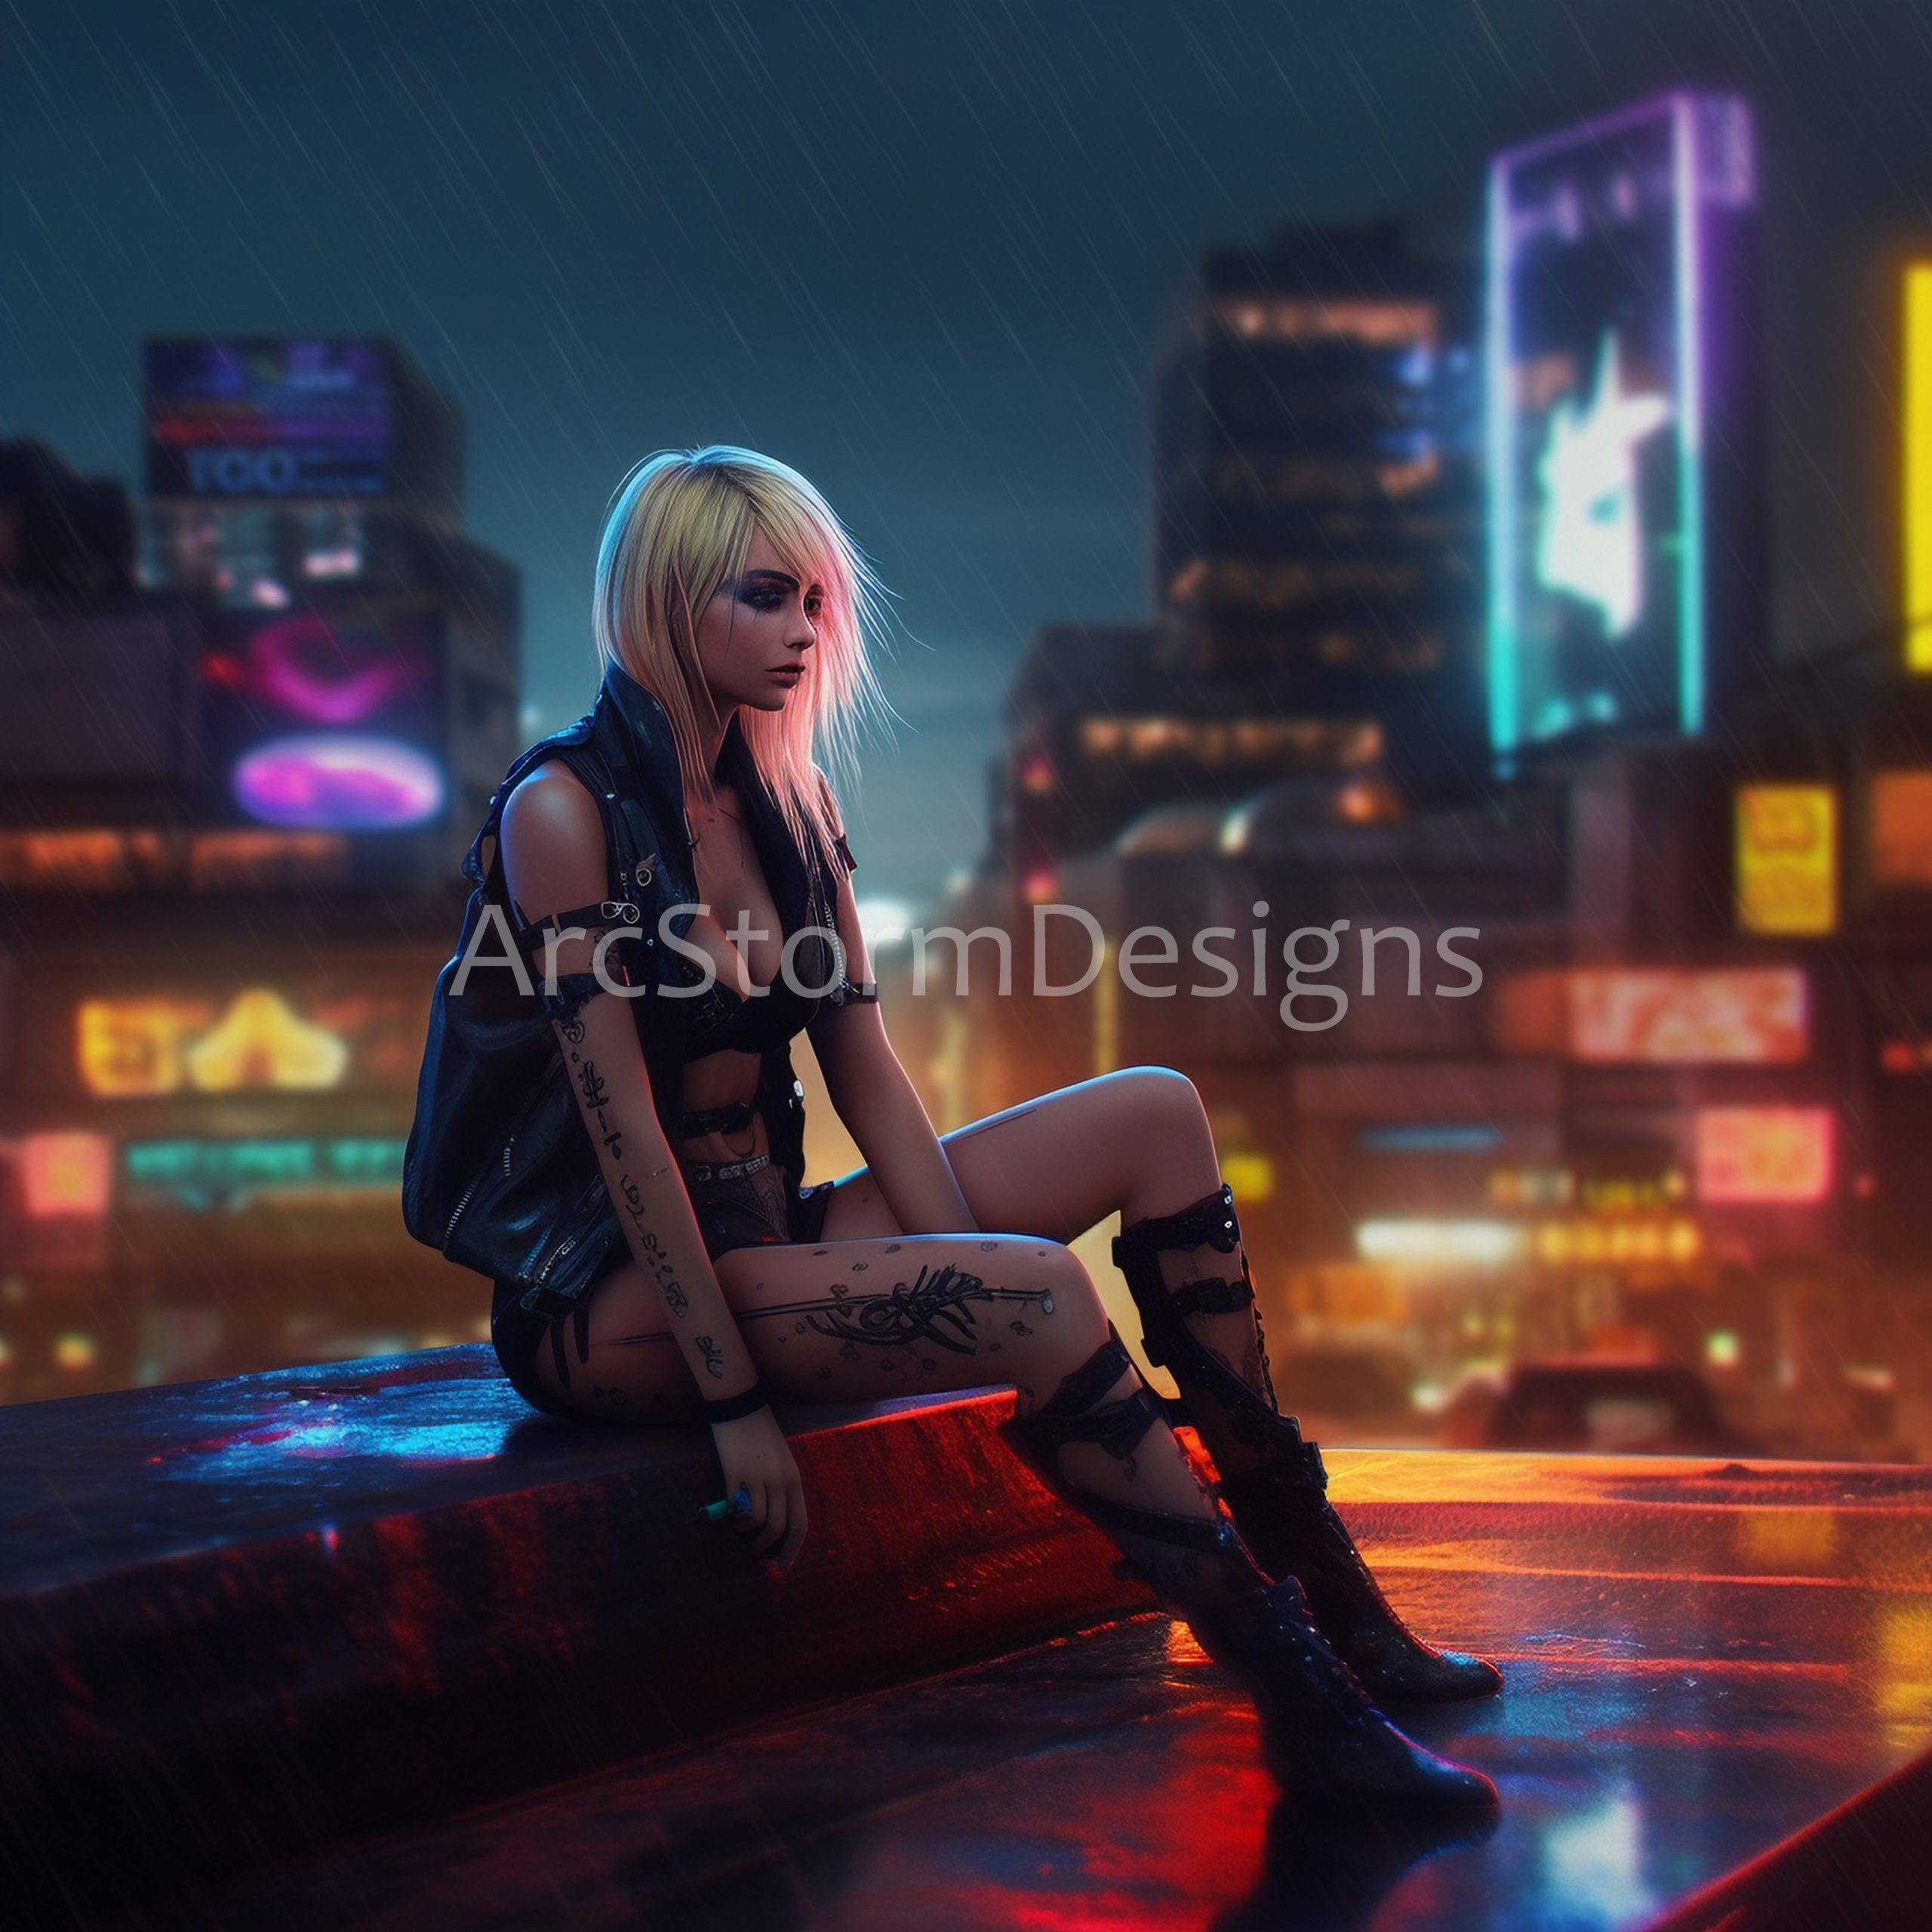 Cyberpunk Thoughts: A Troubled Night